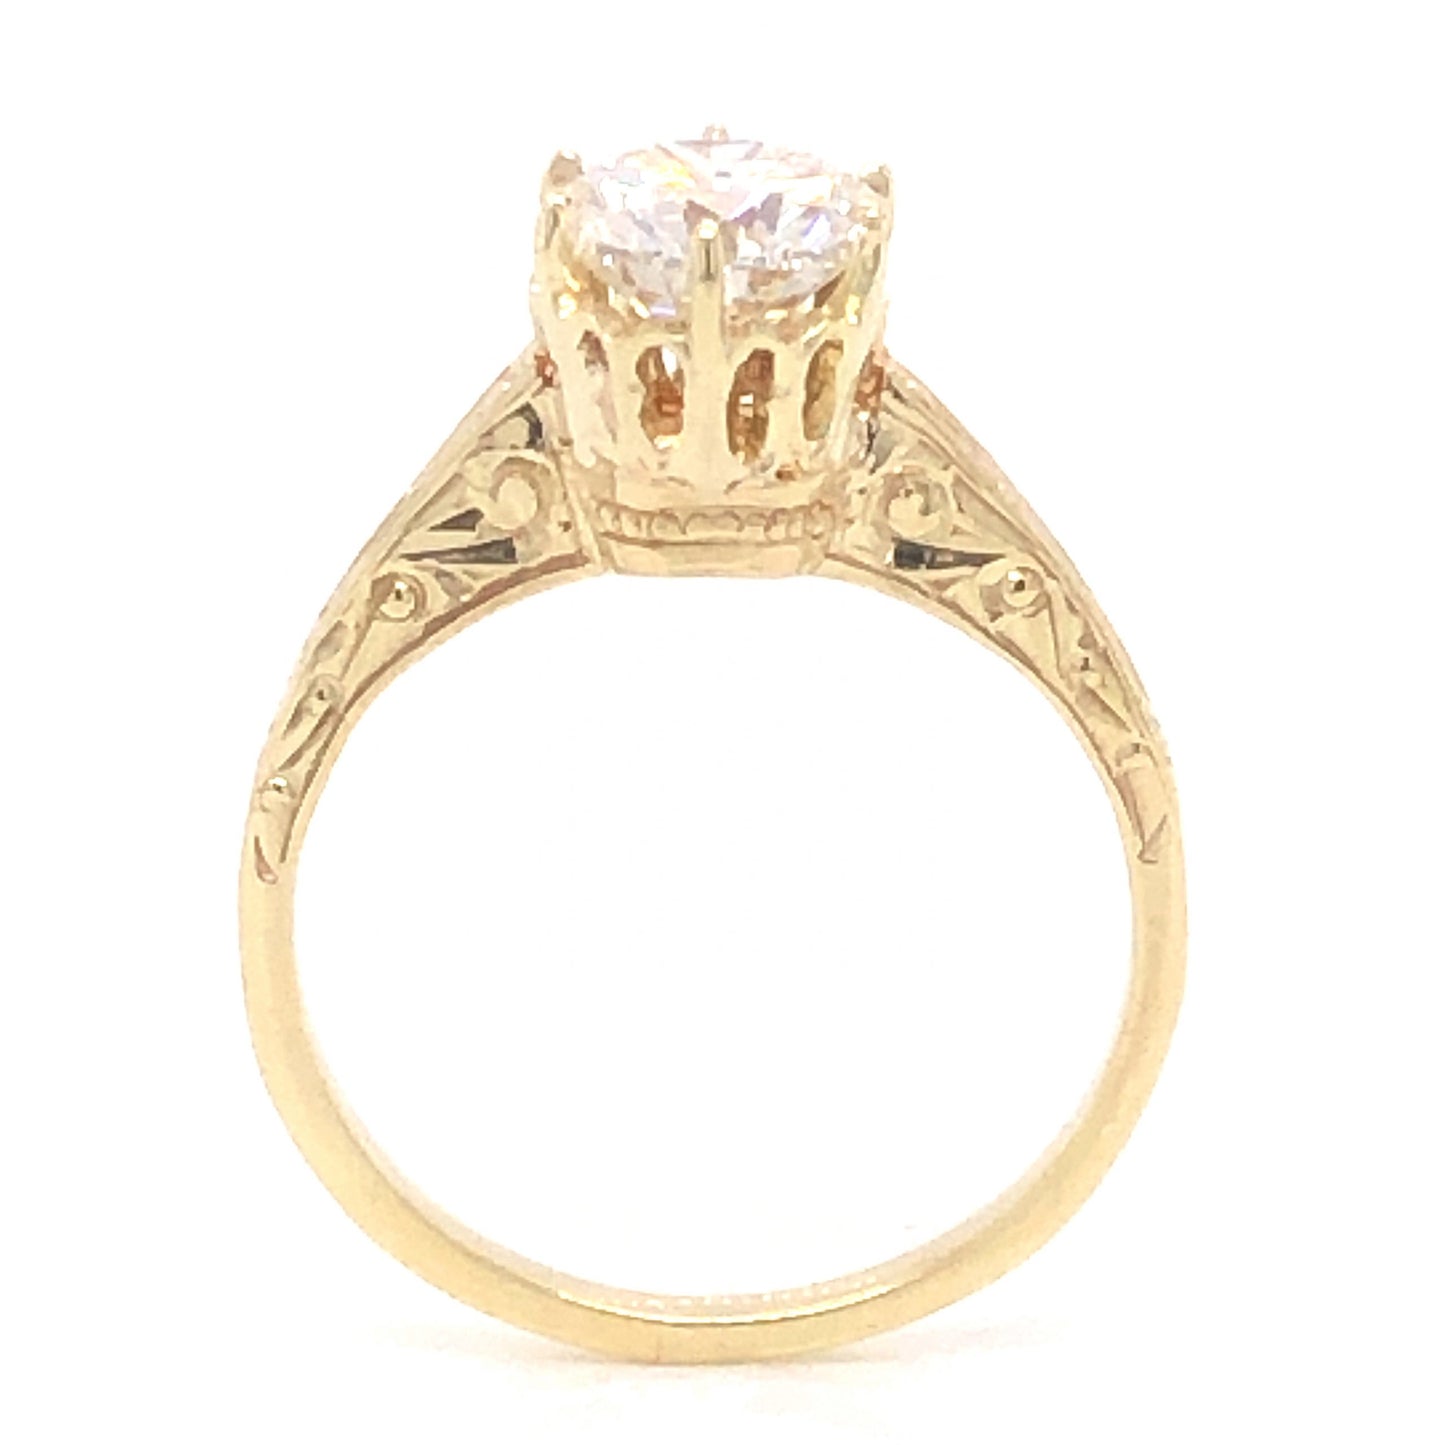 Late Art Deco 1.23 Diamond Engagement Ring in 14k Yellow Gold